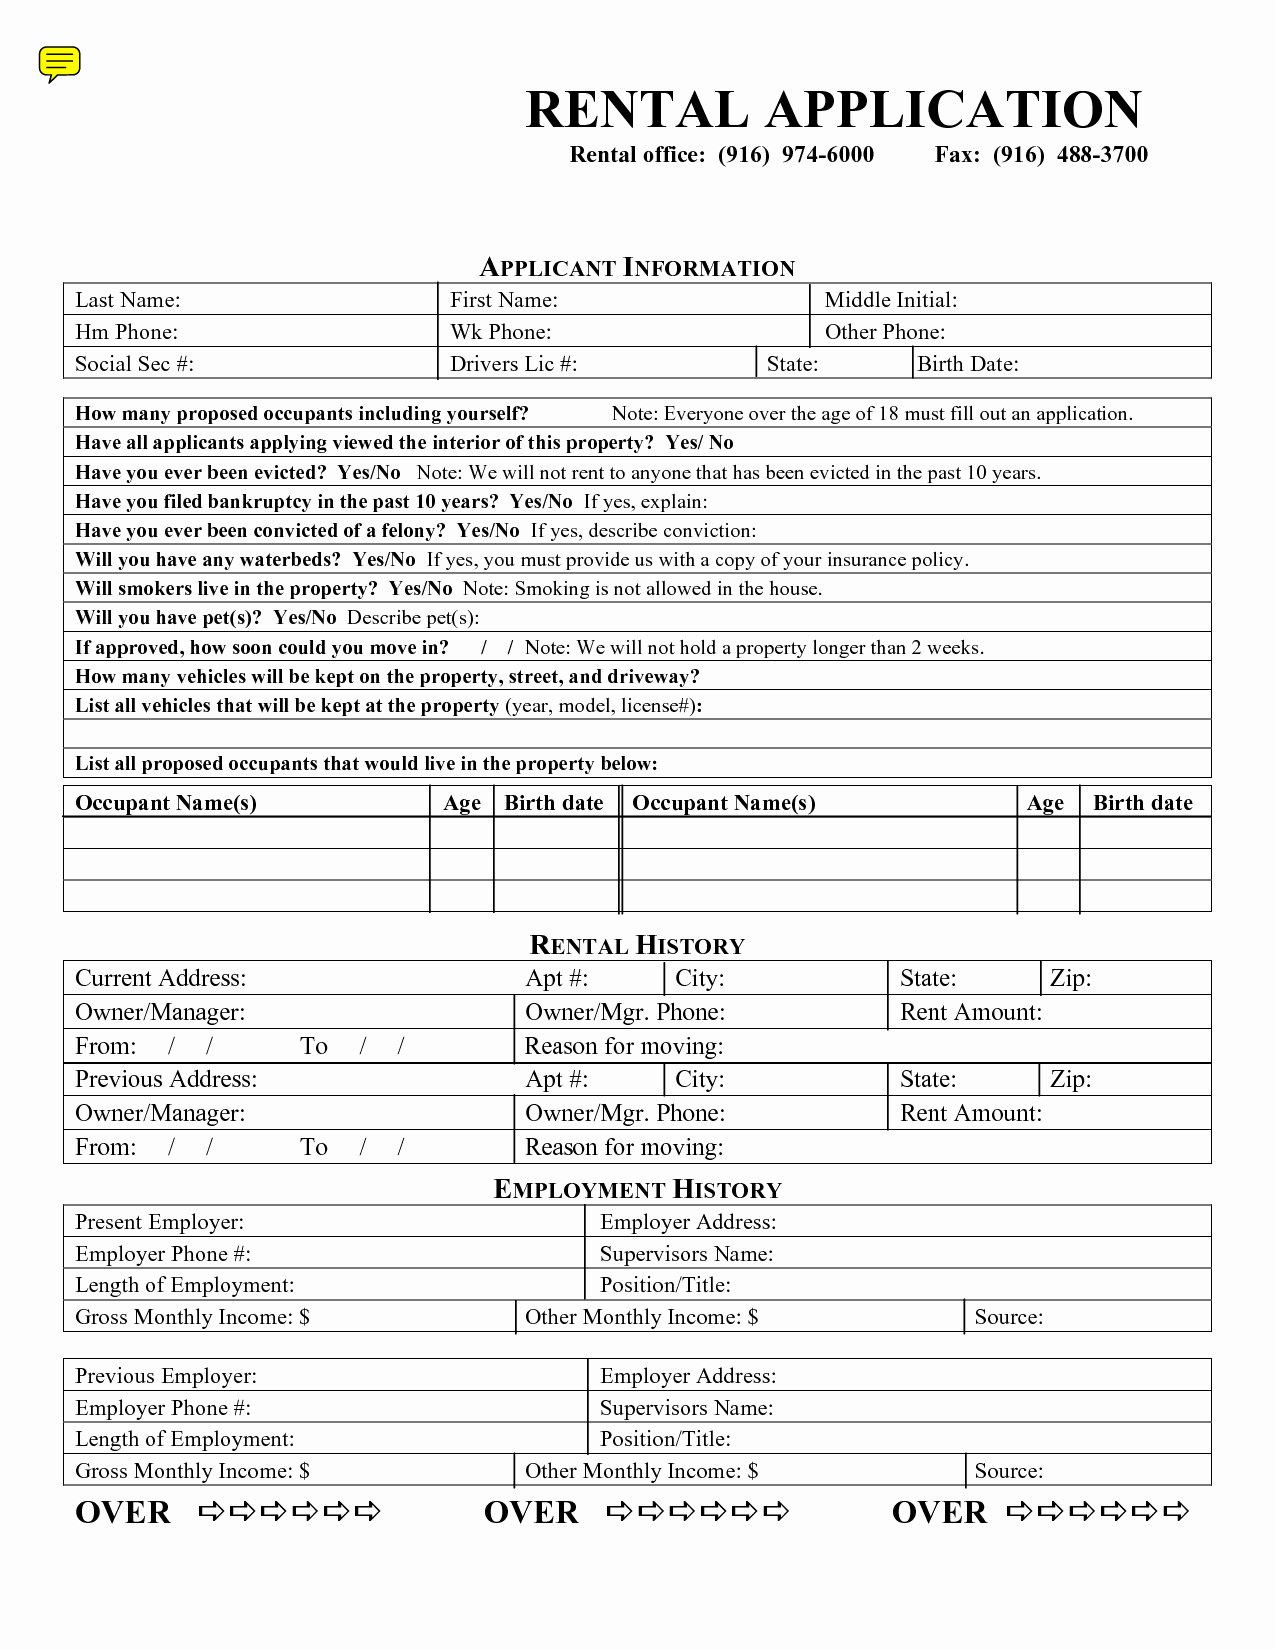 Free Printable Rental Application New Free Rental Application form by Mary Jmenintigar House